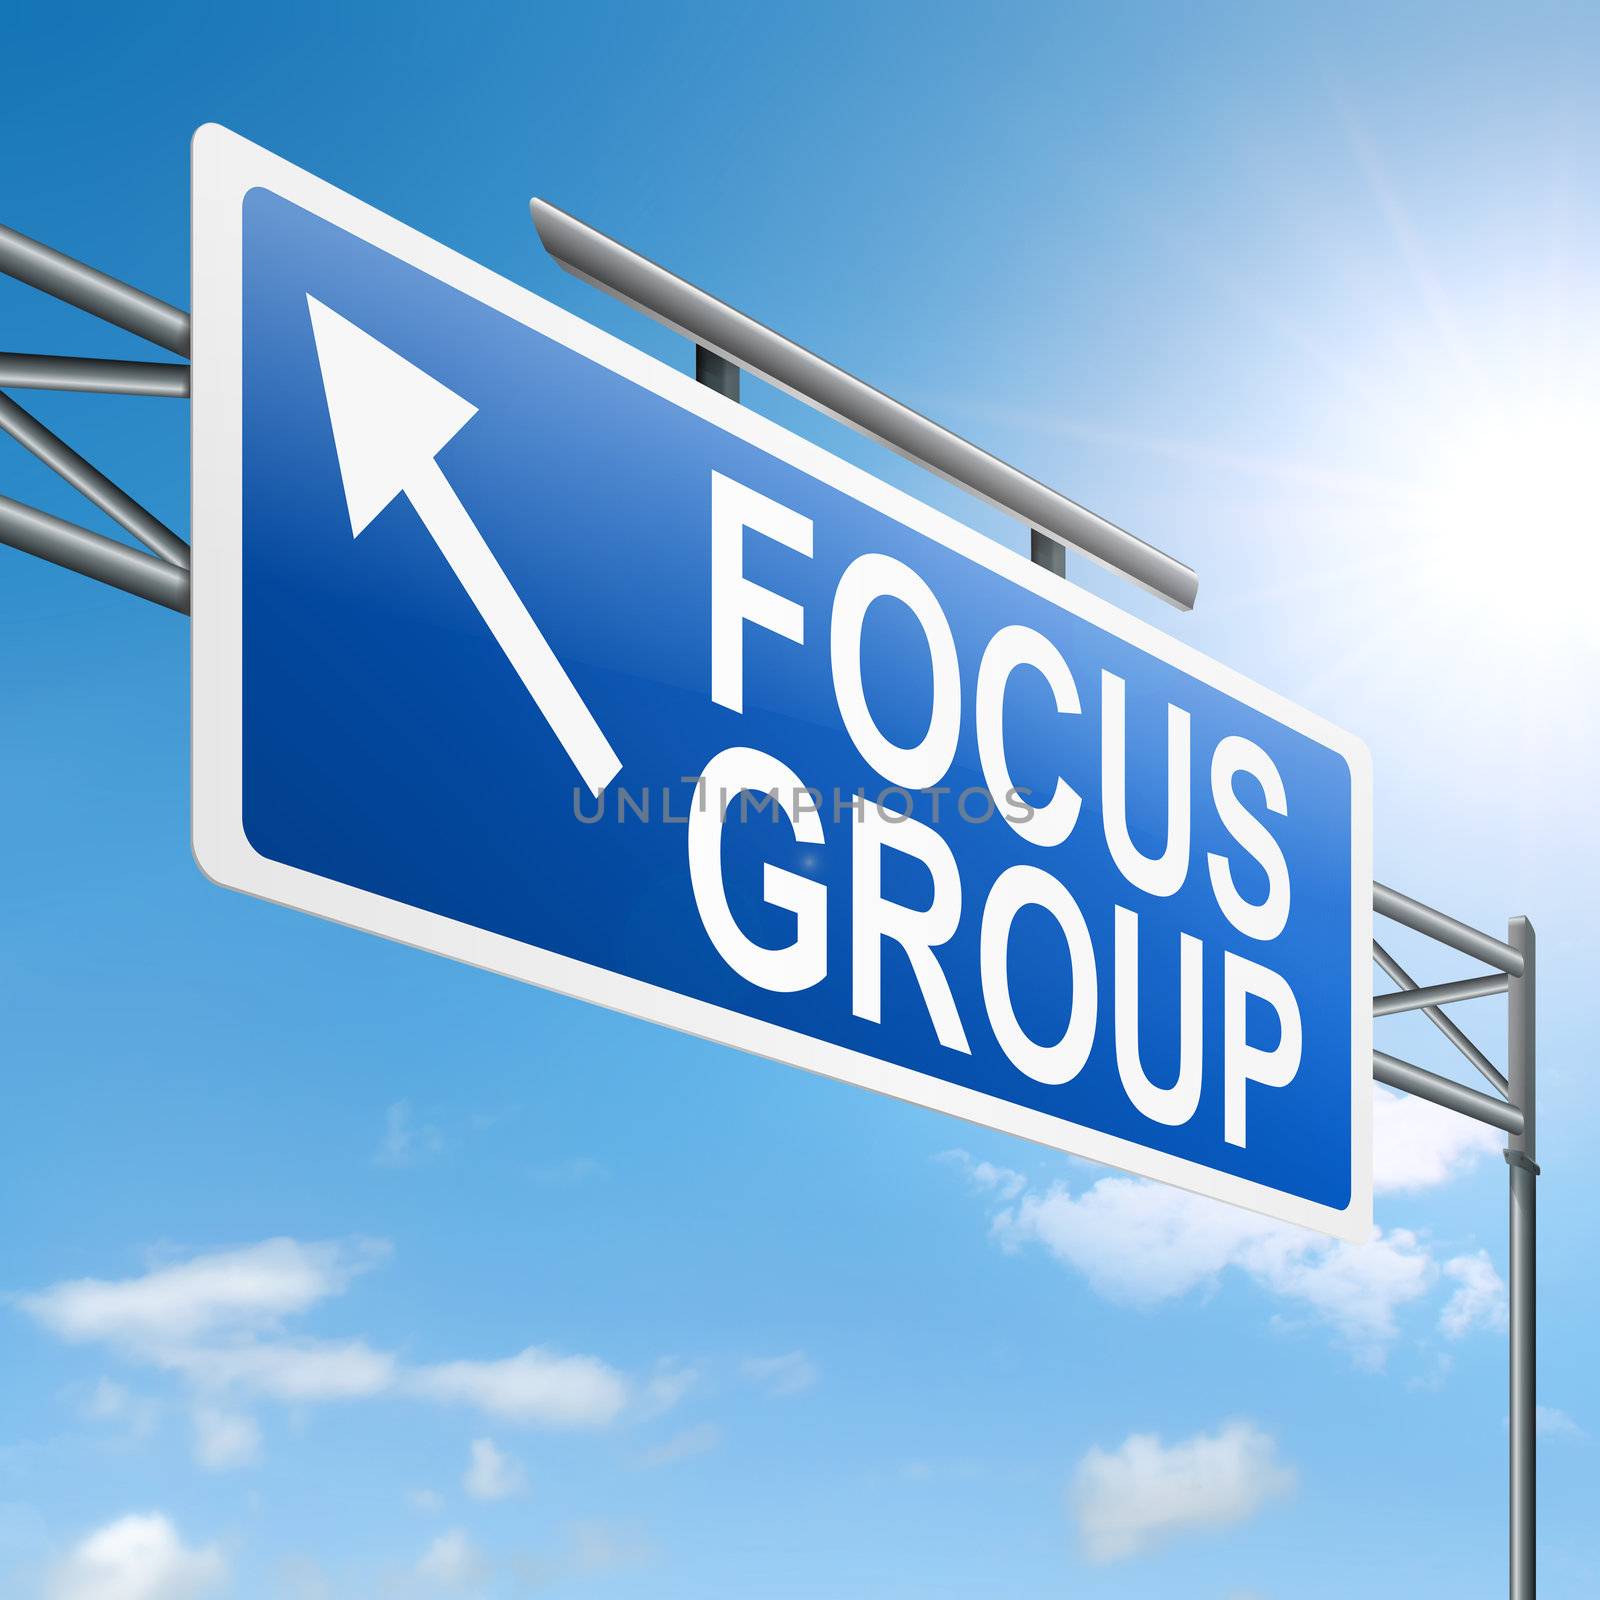 Illustration depicting a roadsign with a focus group concept. White background.